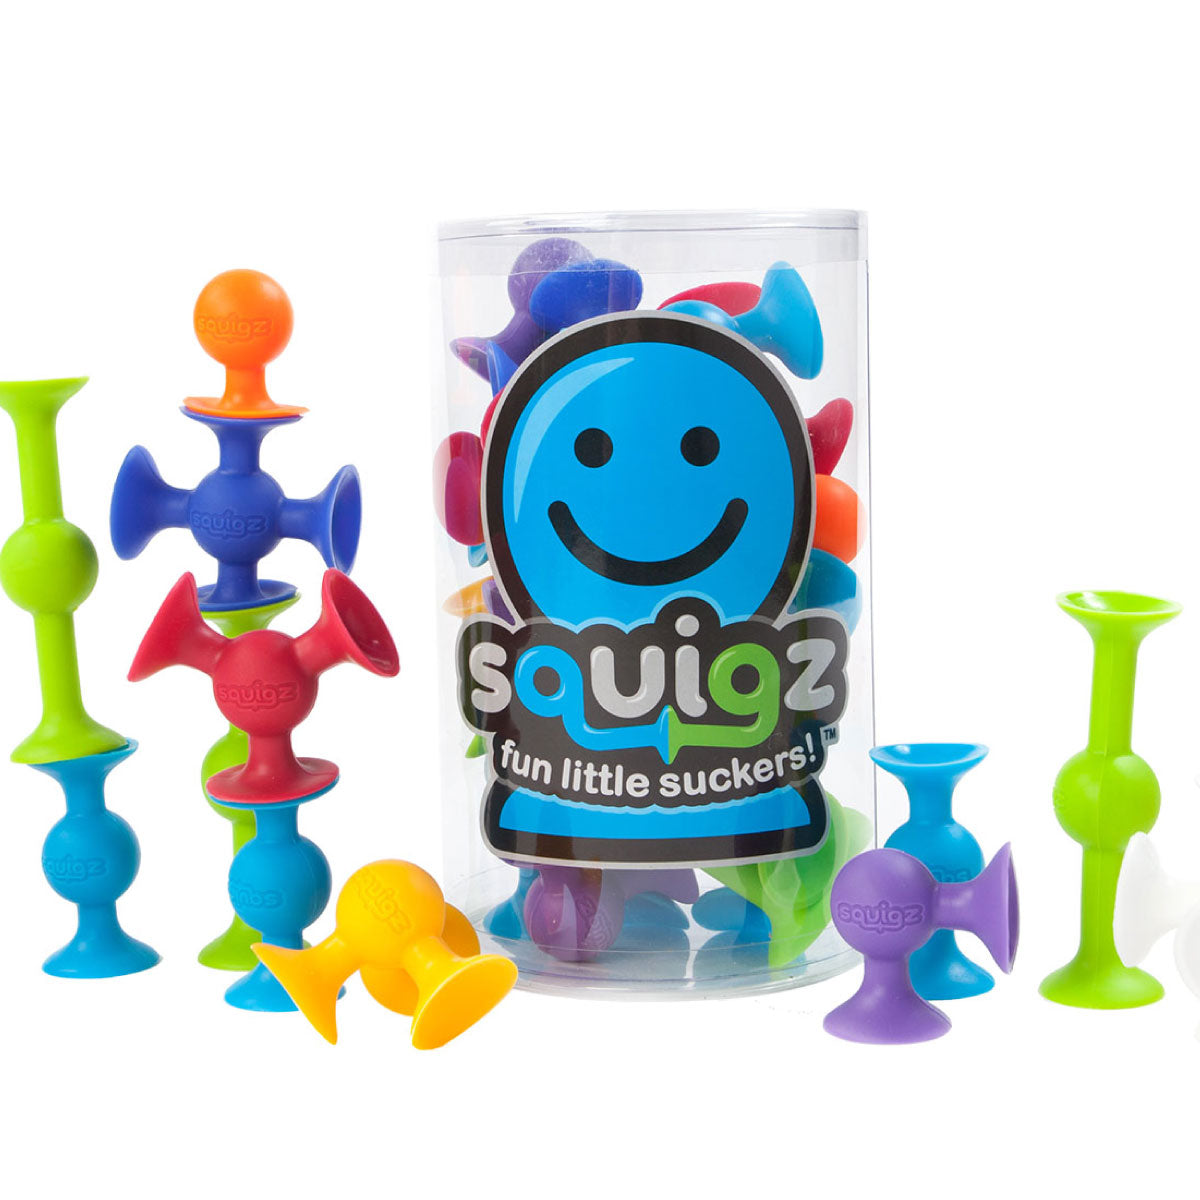 Squigz 24pc Starter Set from Fat Brain Toys